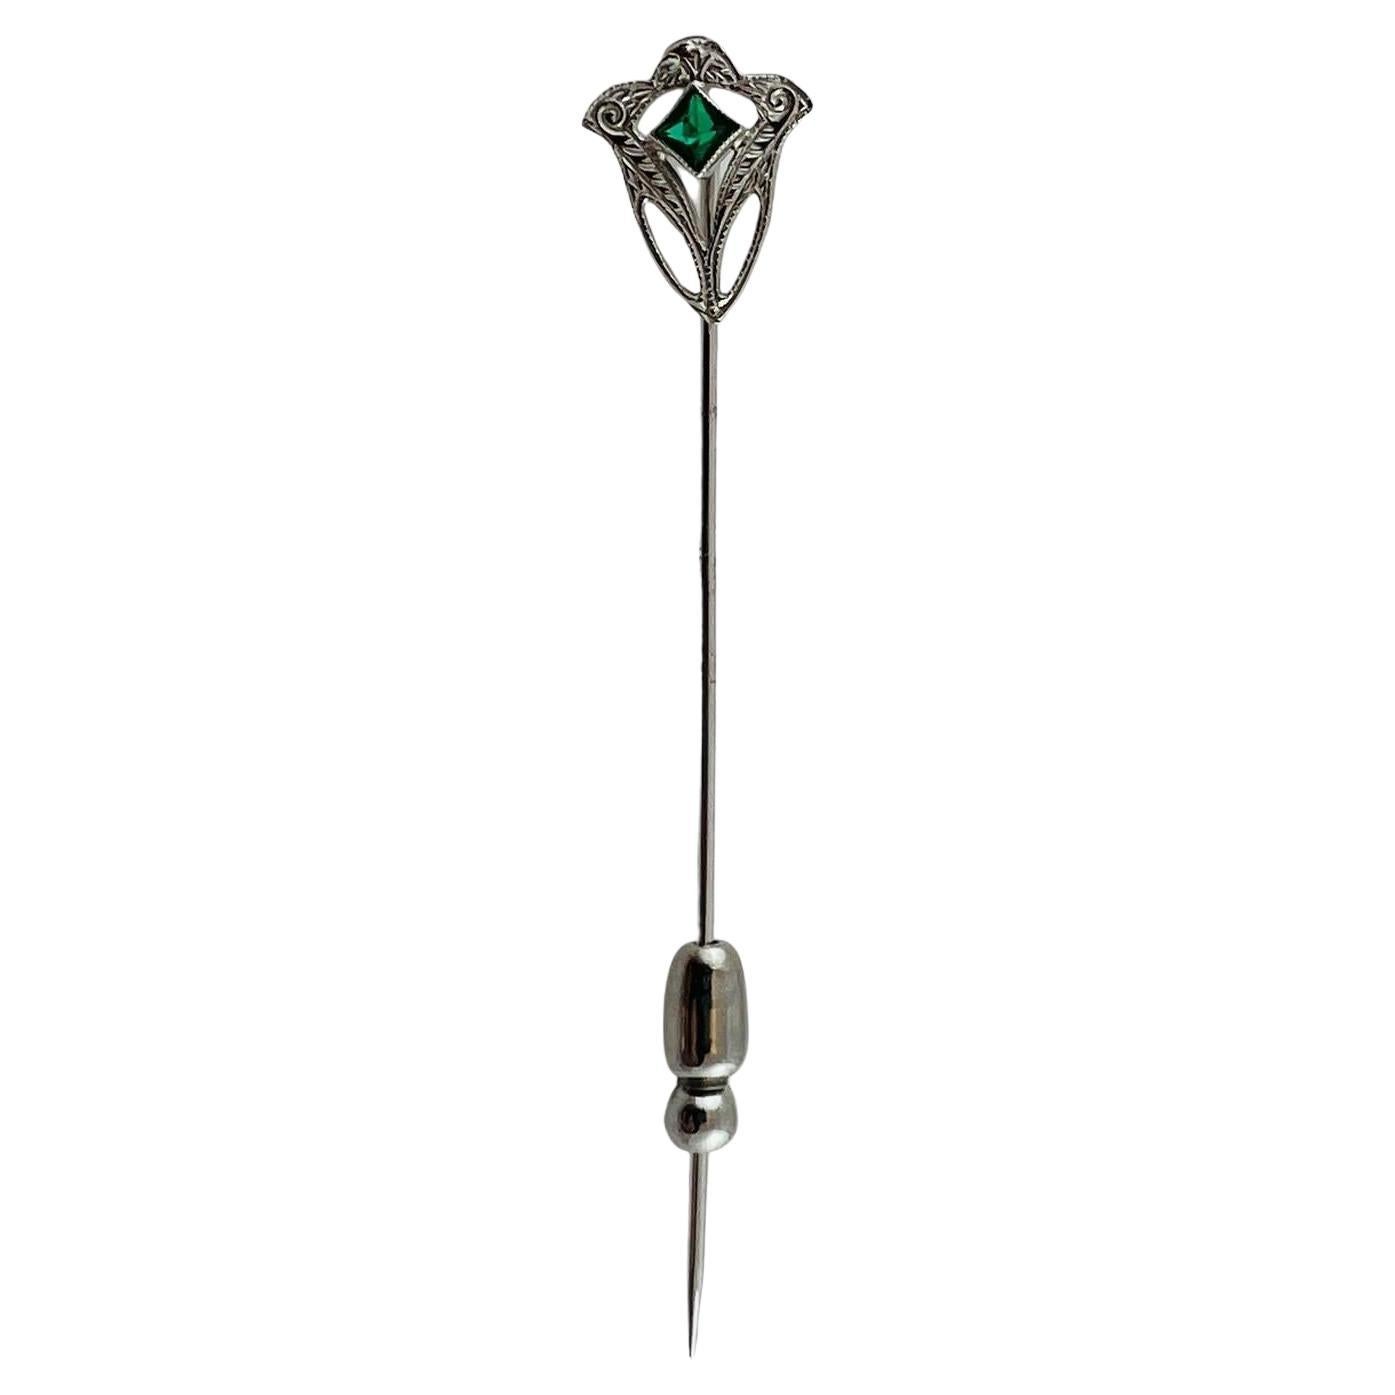 10K White Gold Stick Pin with Green Glass Stone #15688